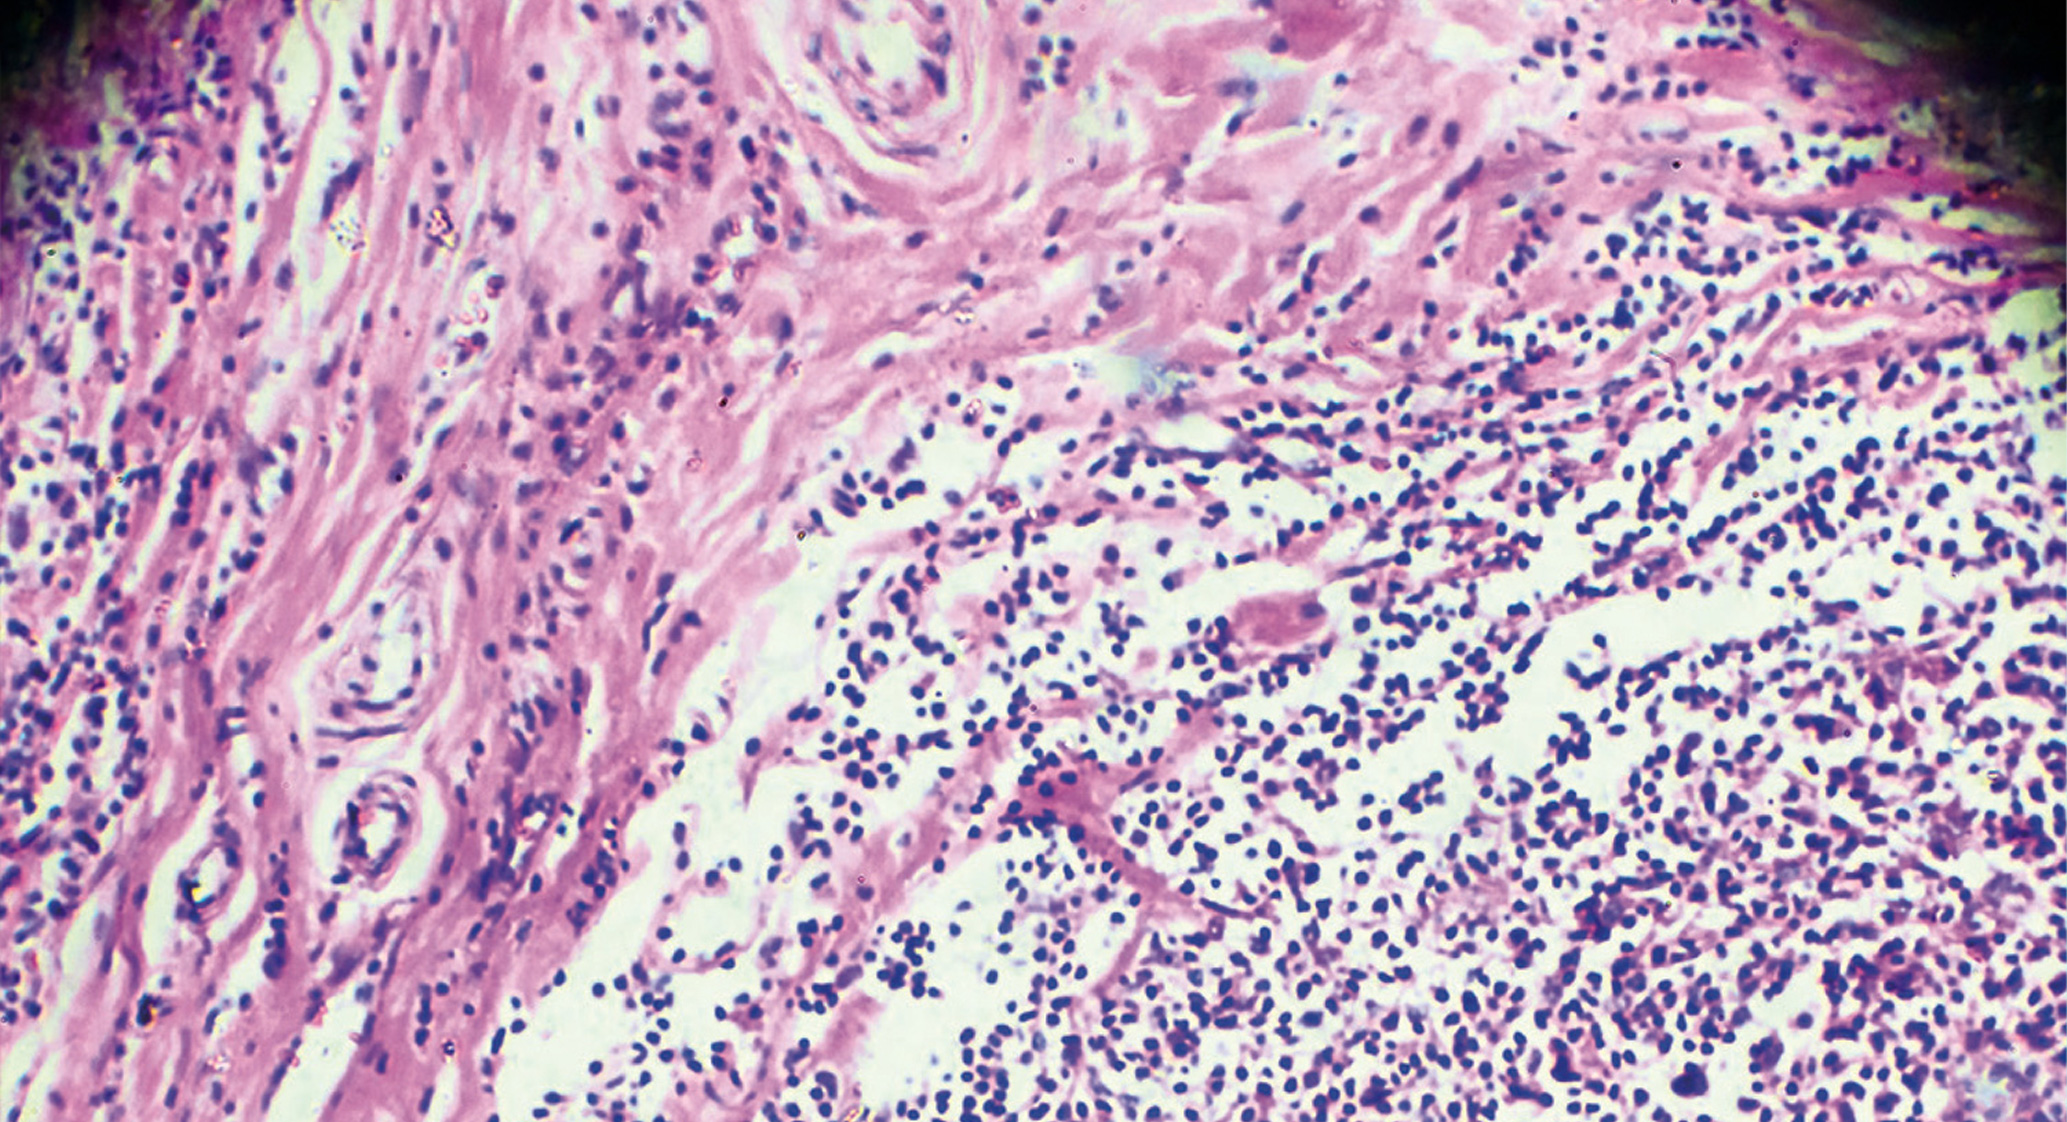 Microscopic view of Hodgkin lymphoma shows closely packed granules with a few patches and strands in-between